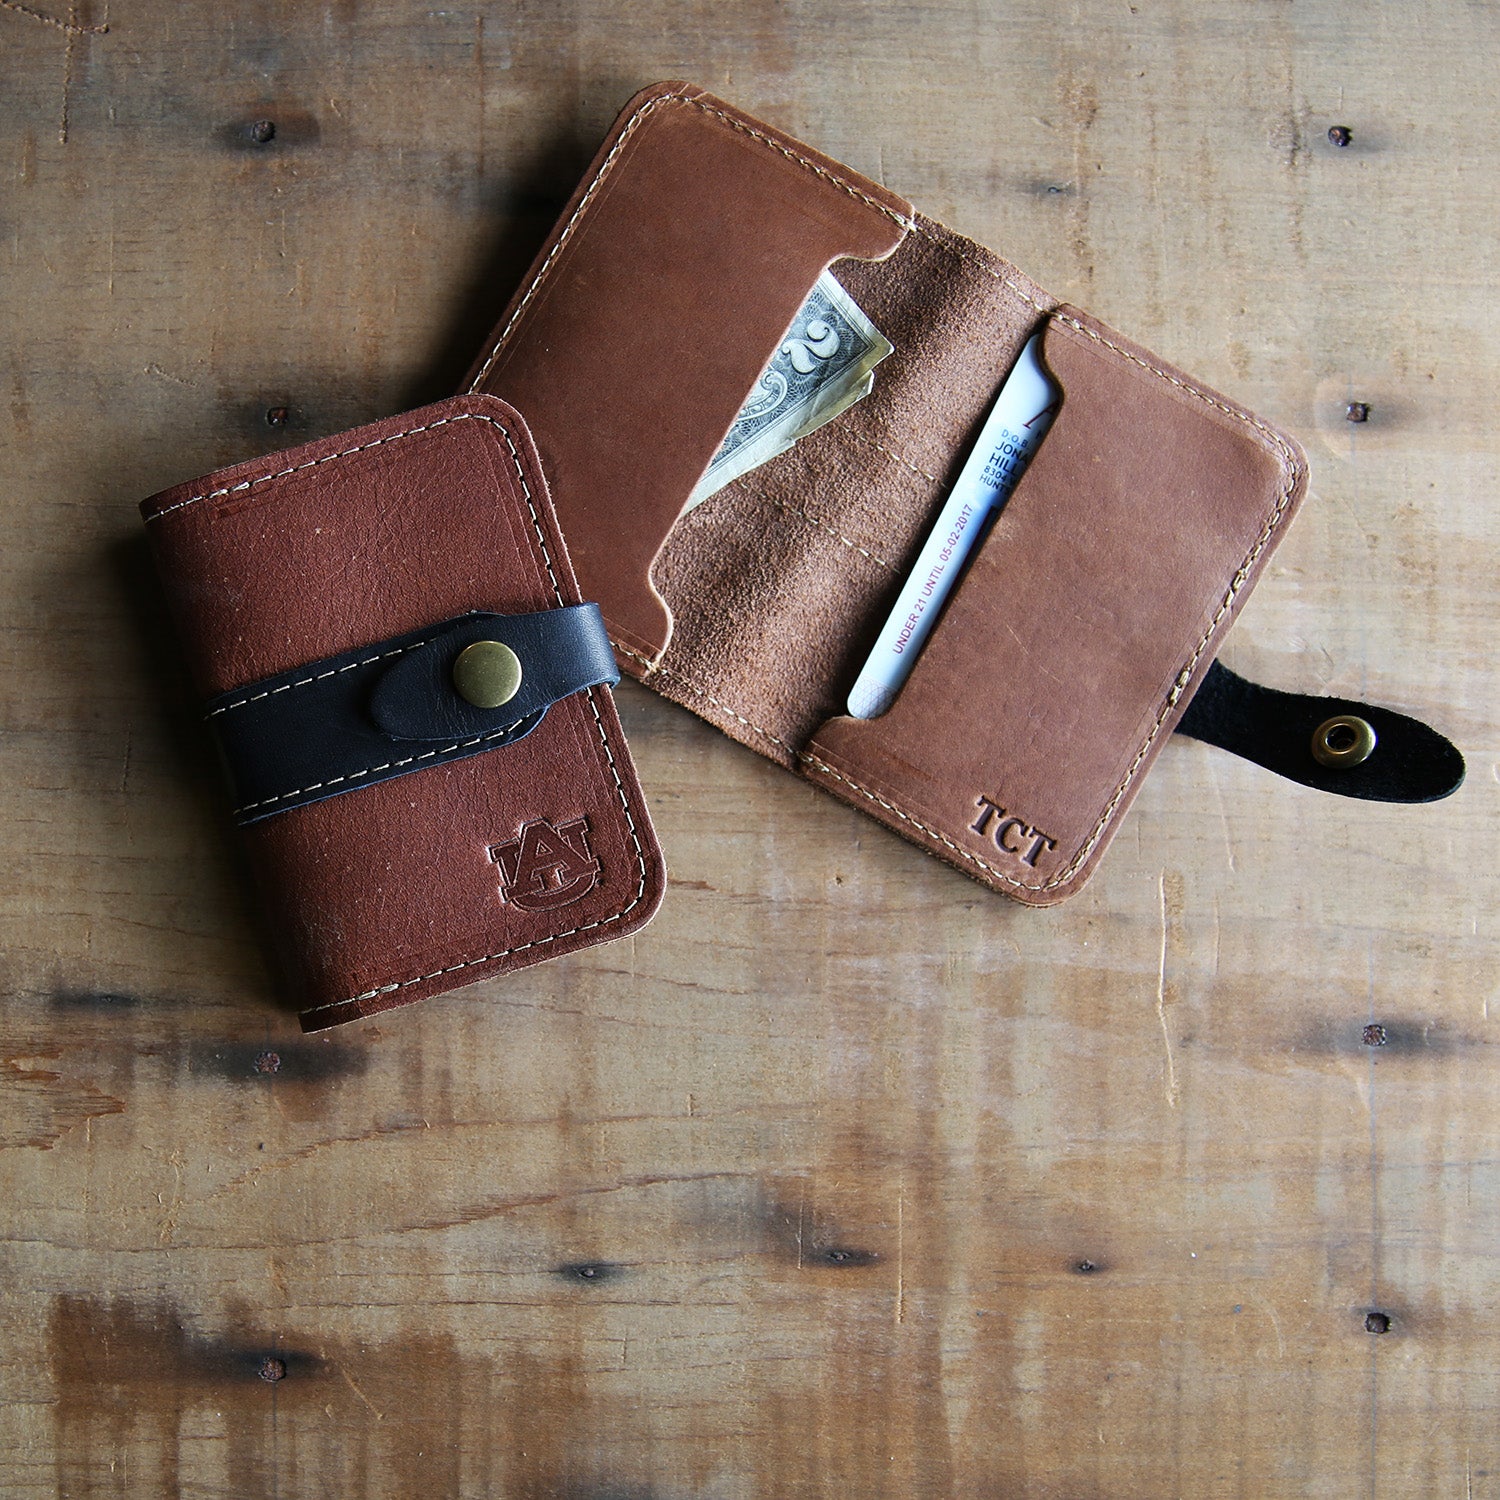 Fine leather snap closure bifold wallet with personalized initials and Auburn University logo